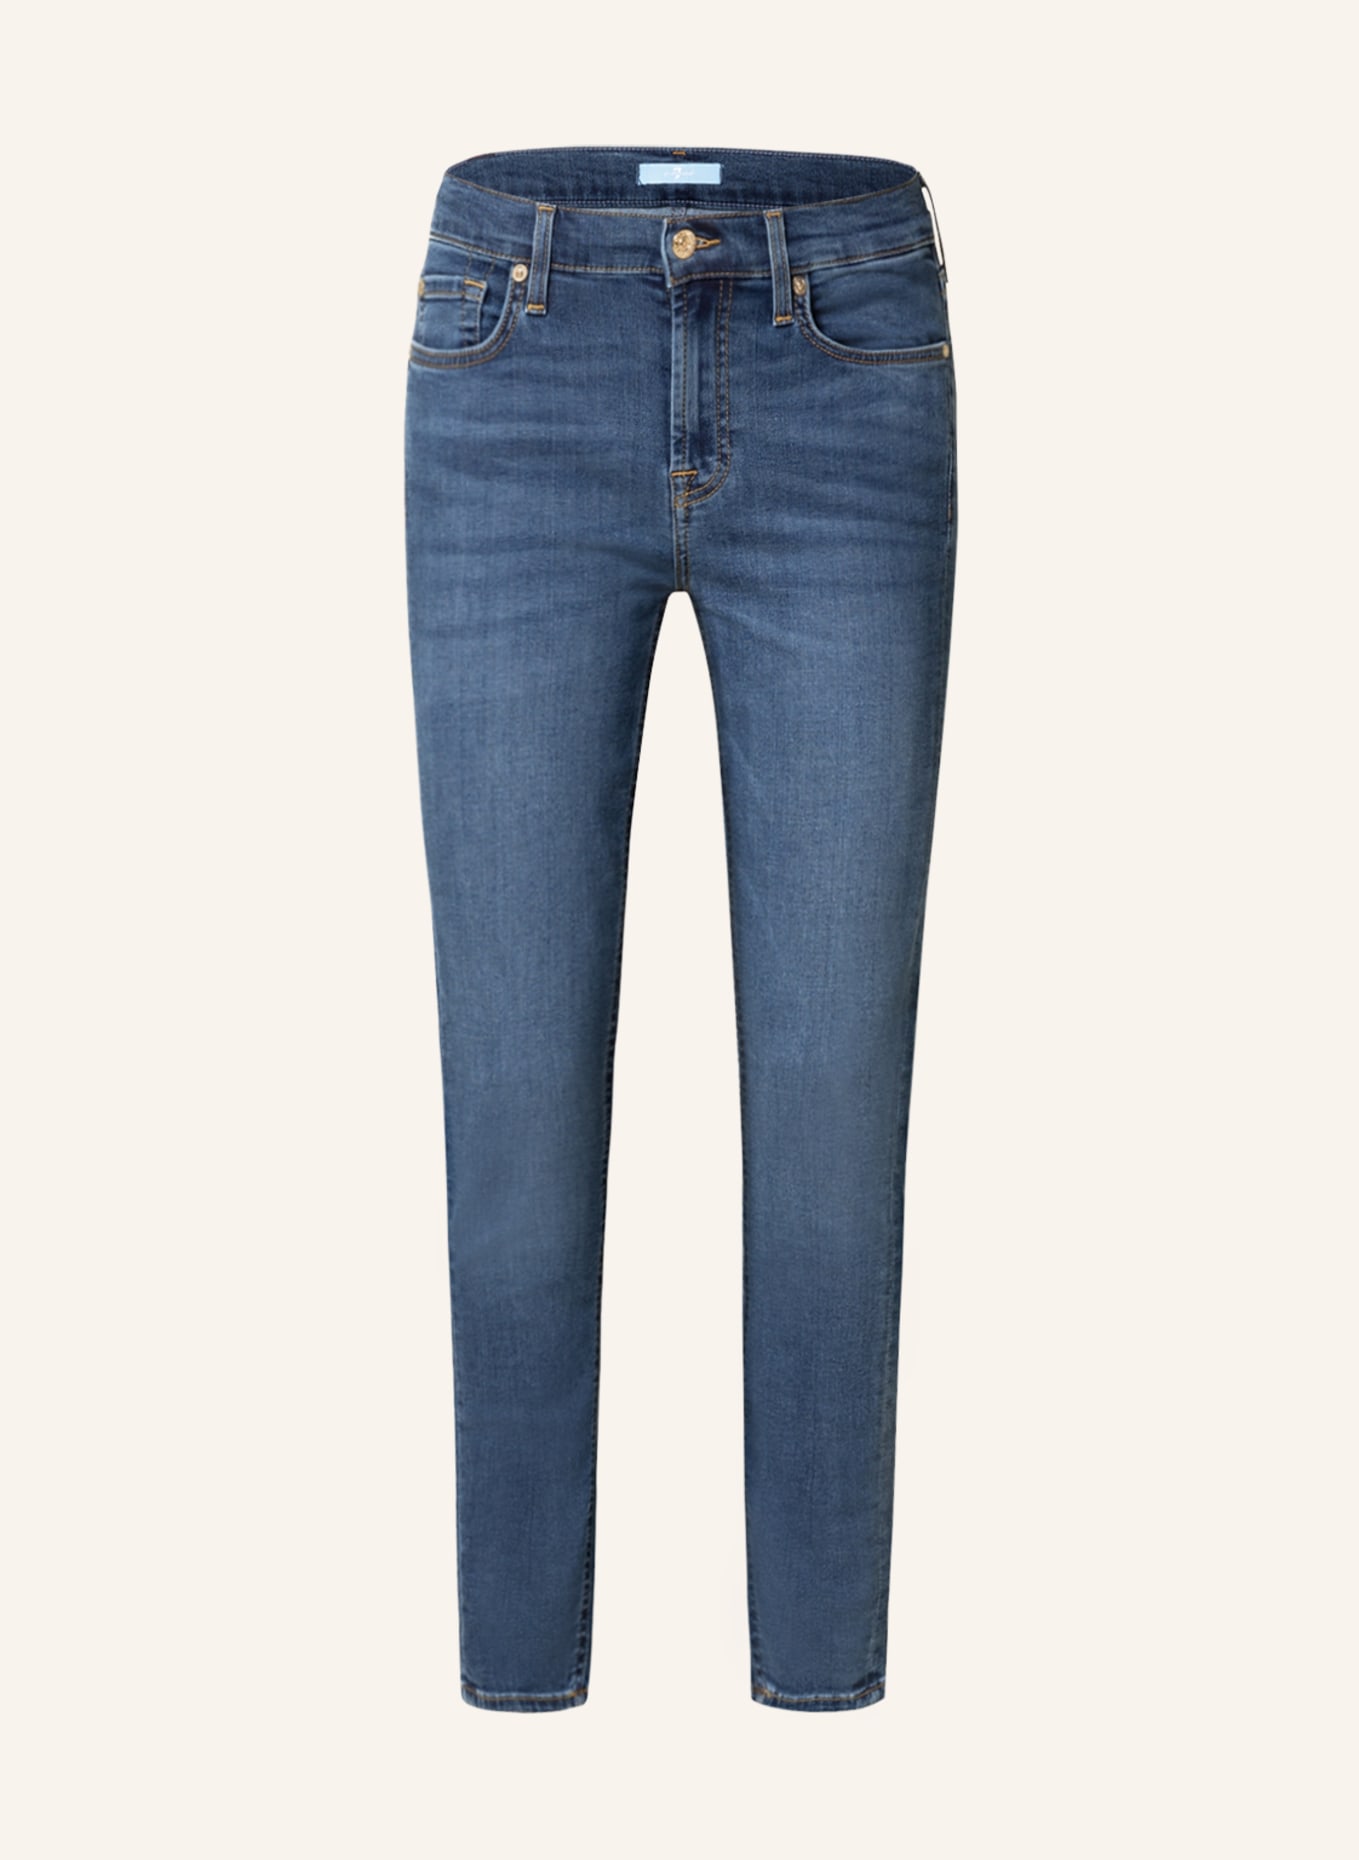 7 for all mankind Skinny Jeans THE ANKLE SKINNY, Farbe: BD MID BLUE (Bild 1)